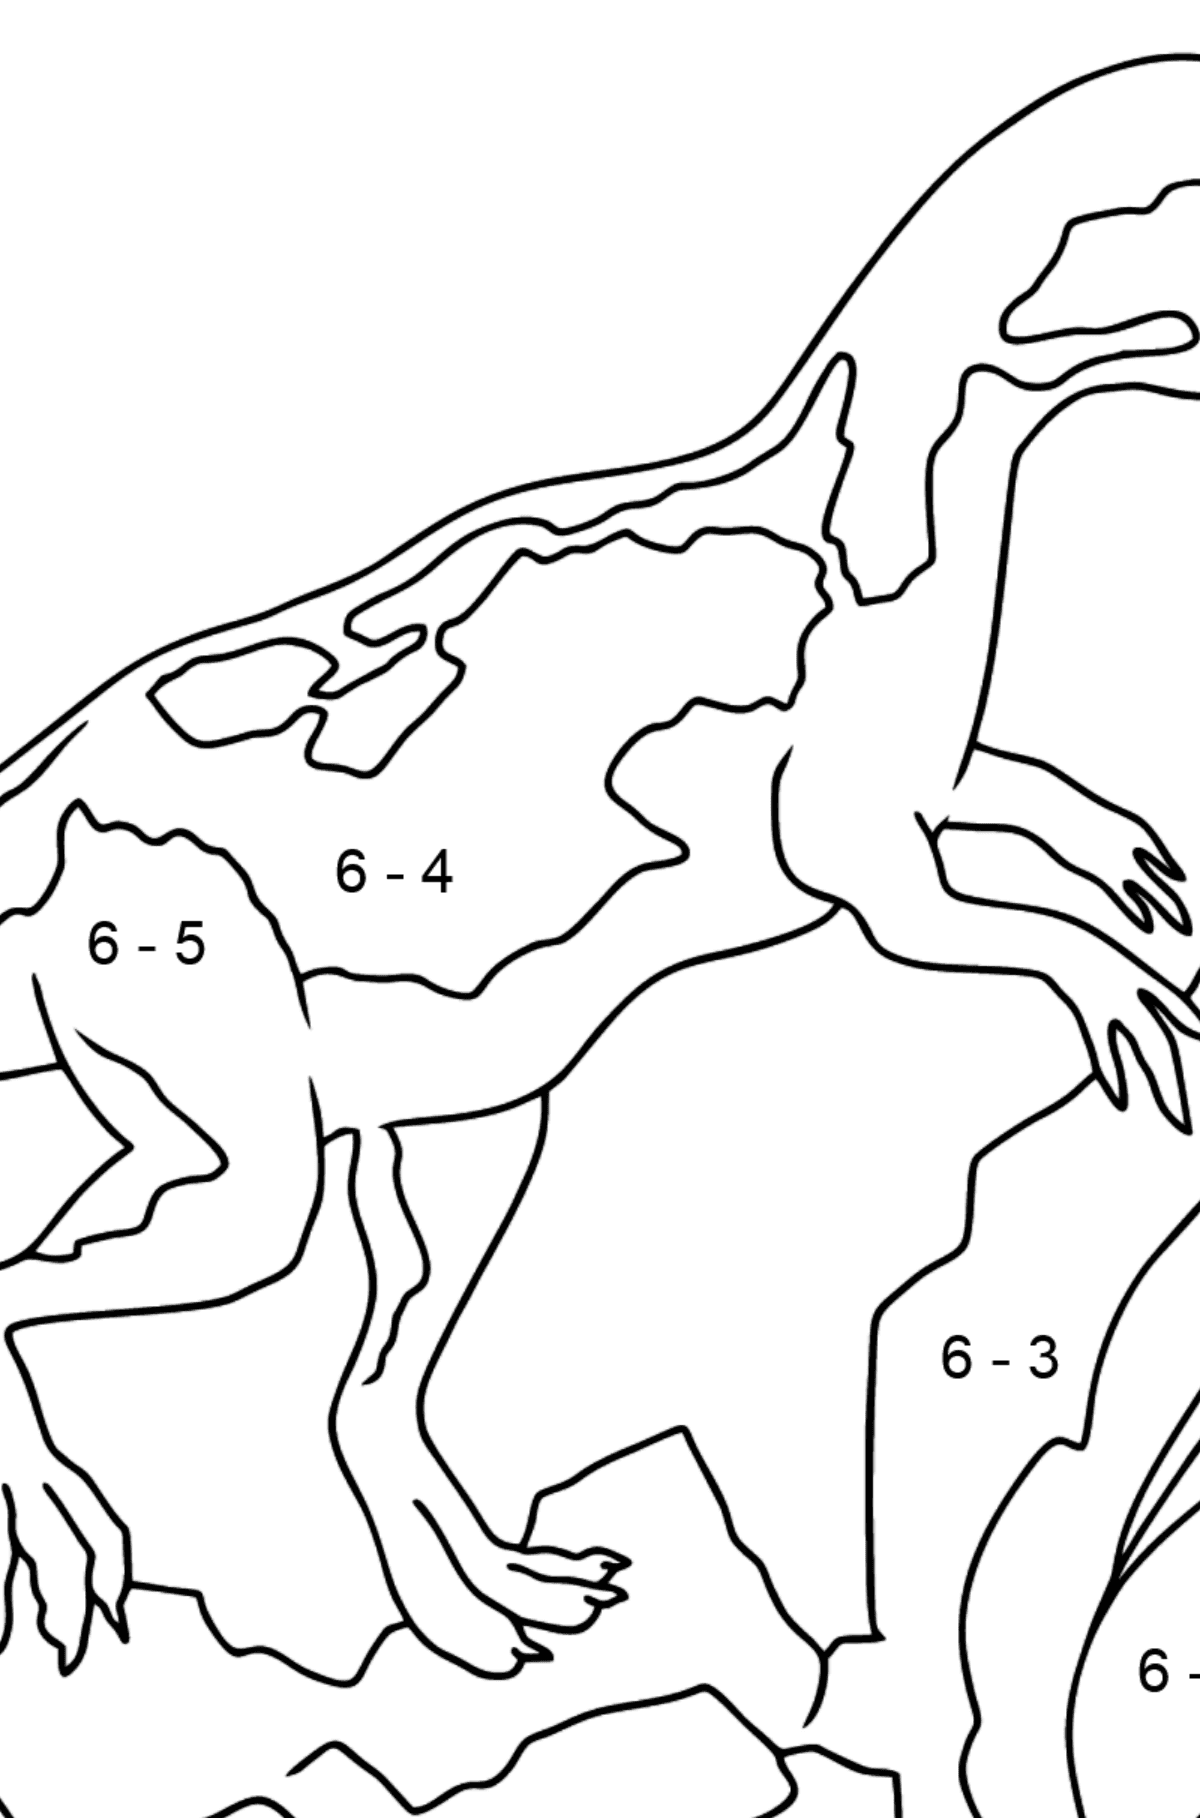 Coloring Page - A Dinosaur is Looking for Food - Math Coloring - Subtraction for Kids